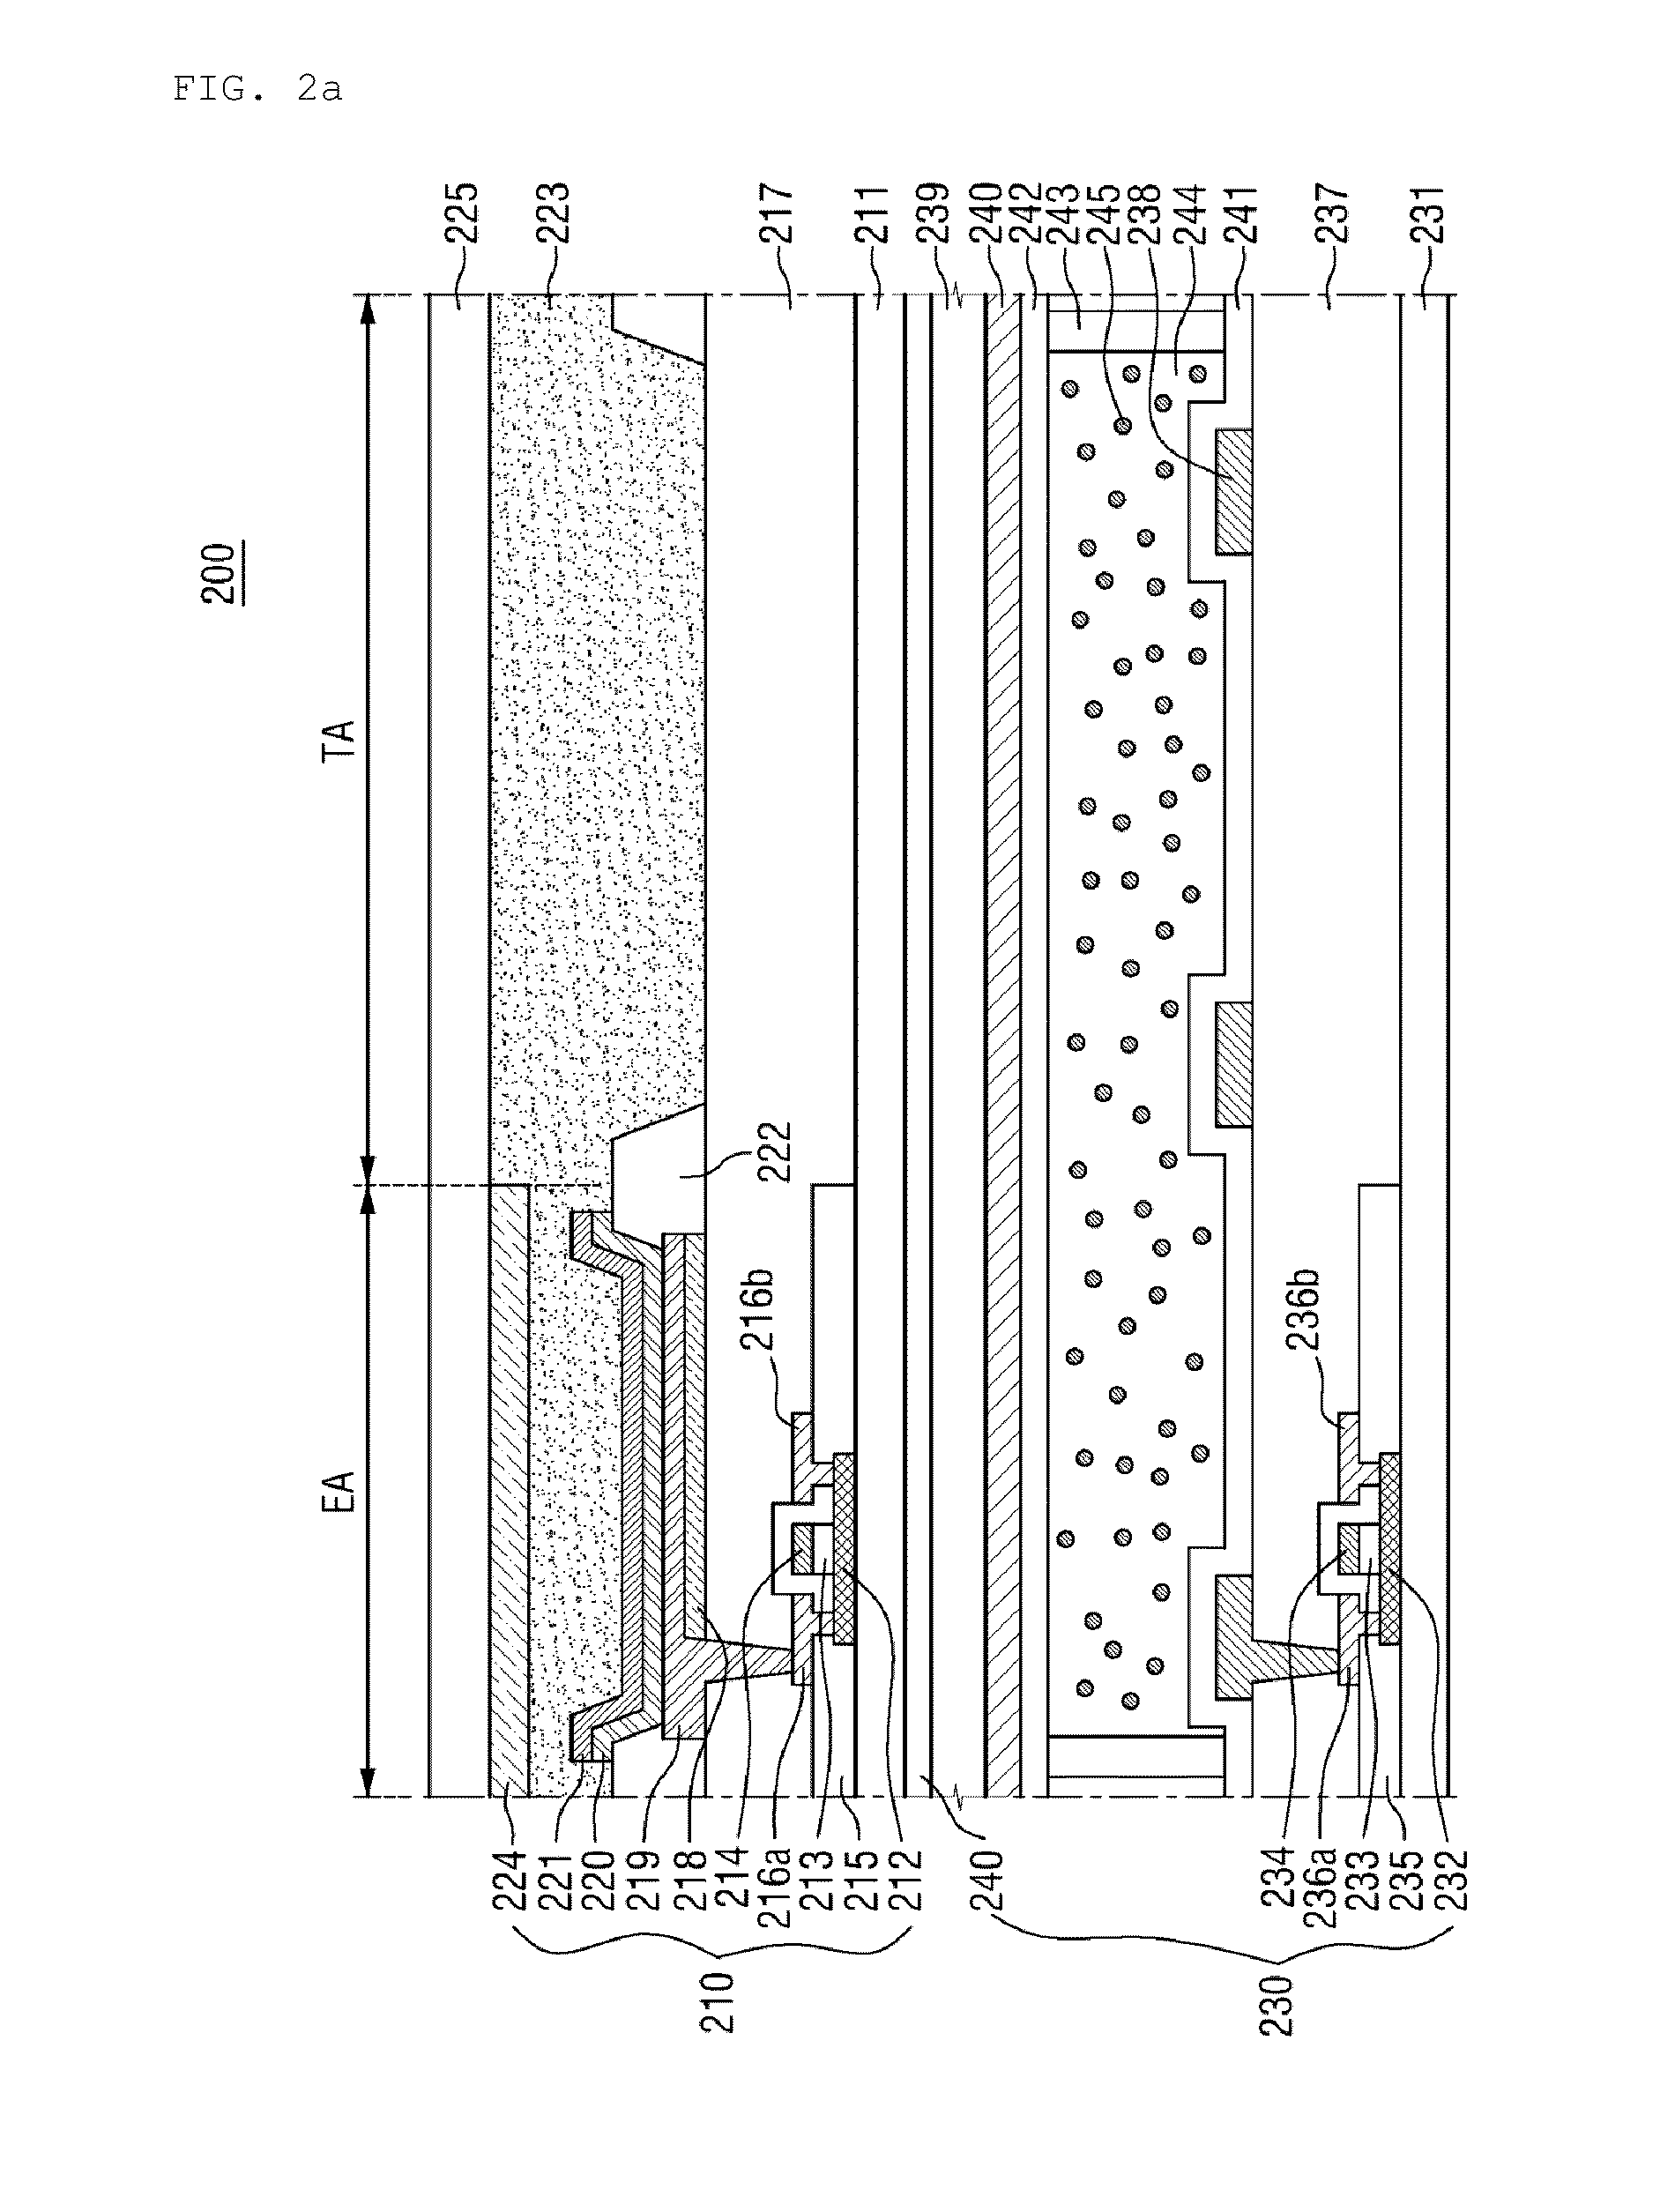 Transparent display apparatus and a method for controlling the same